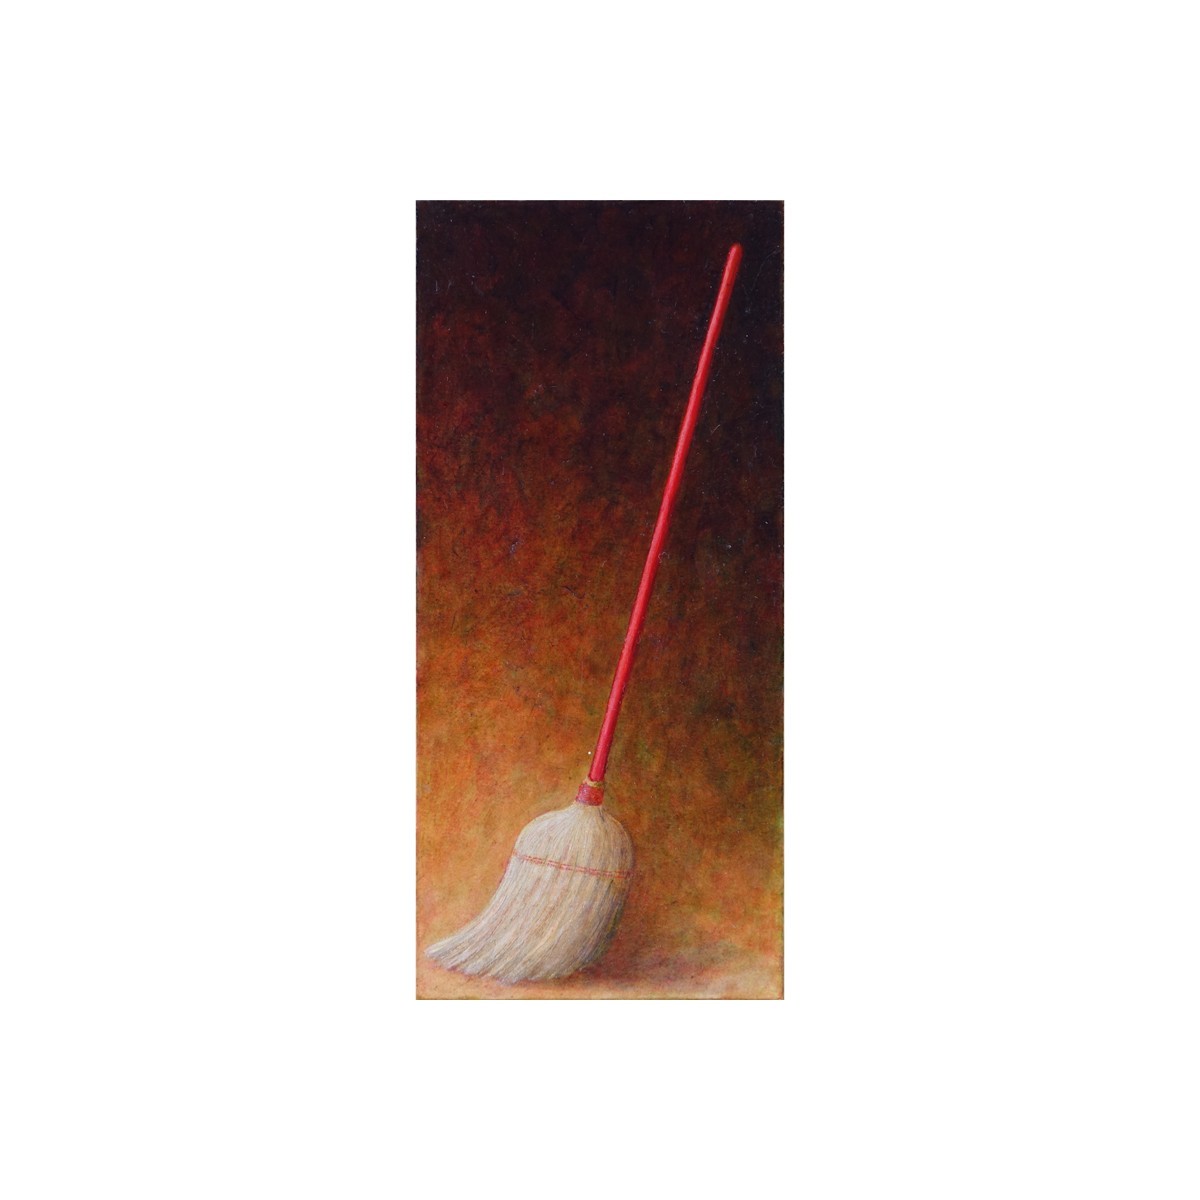 Kathleen Holmes, American  (born 1953) Mixed Media on Paper "Still life Broom", Signed, Title, and Numbered 1/95 en Verso. Good condition.